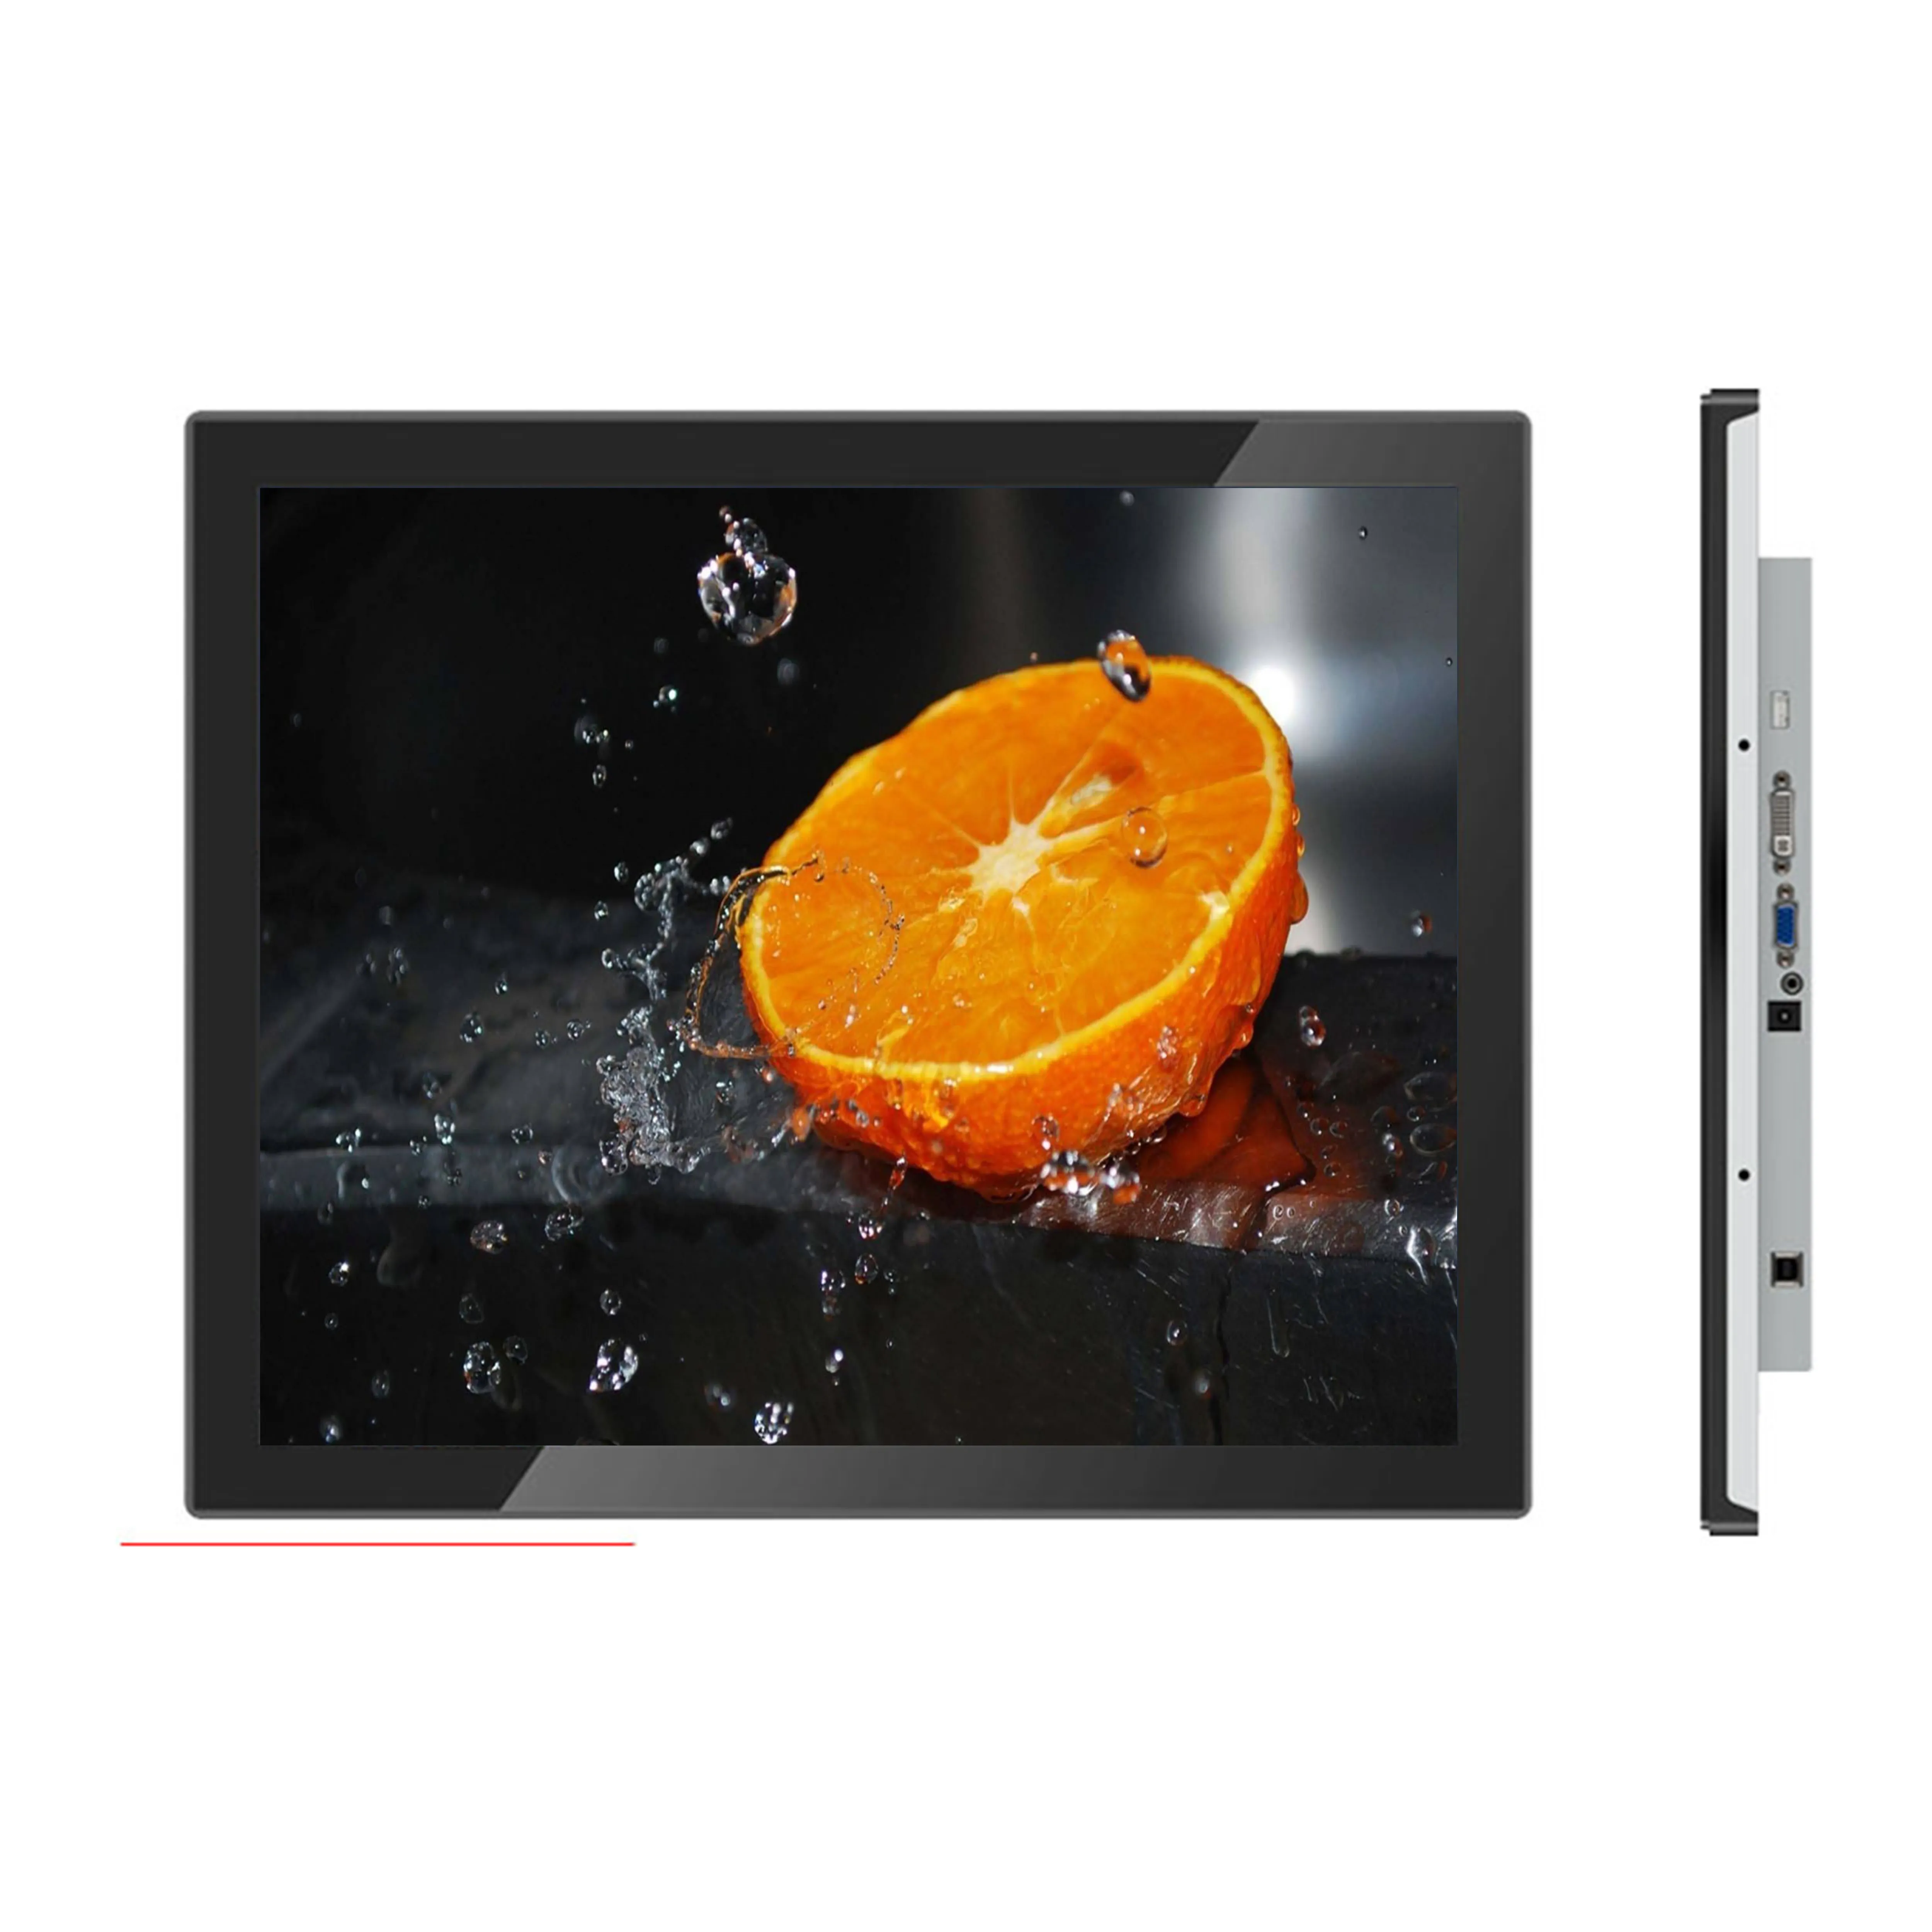 17 19 21.5 23.8 24 26 27 32 inch touch screen lcd display monitor tft usb touch screen lcd led monitor